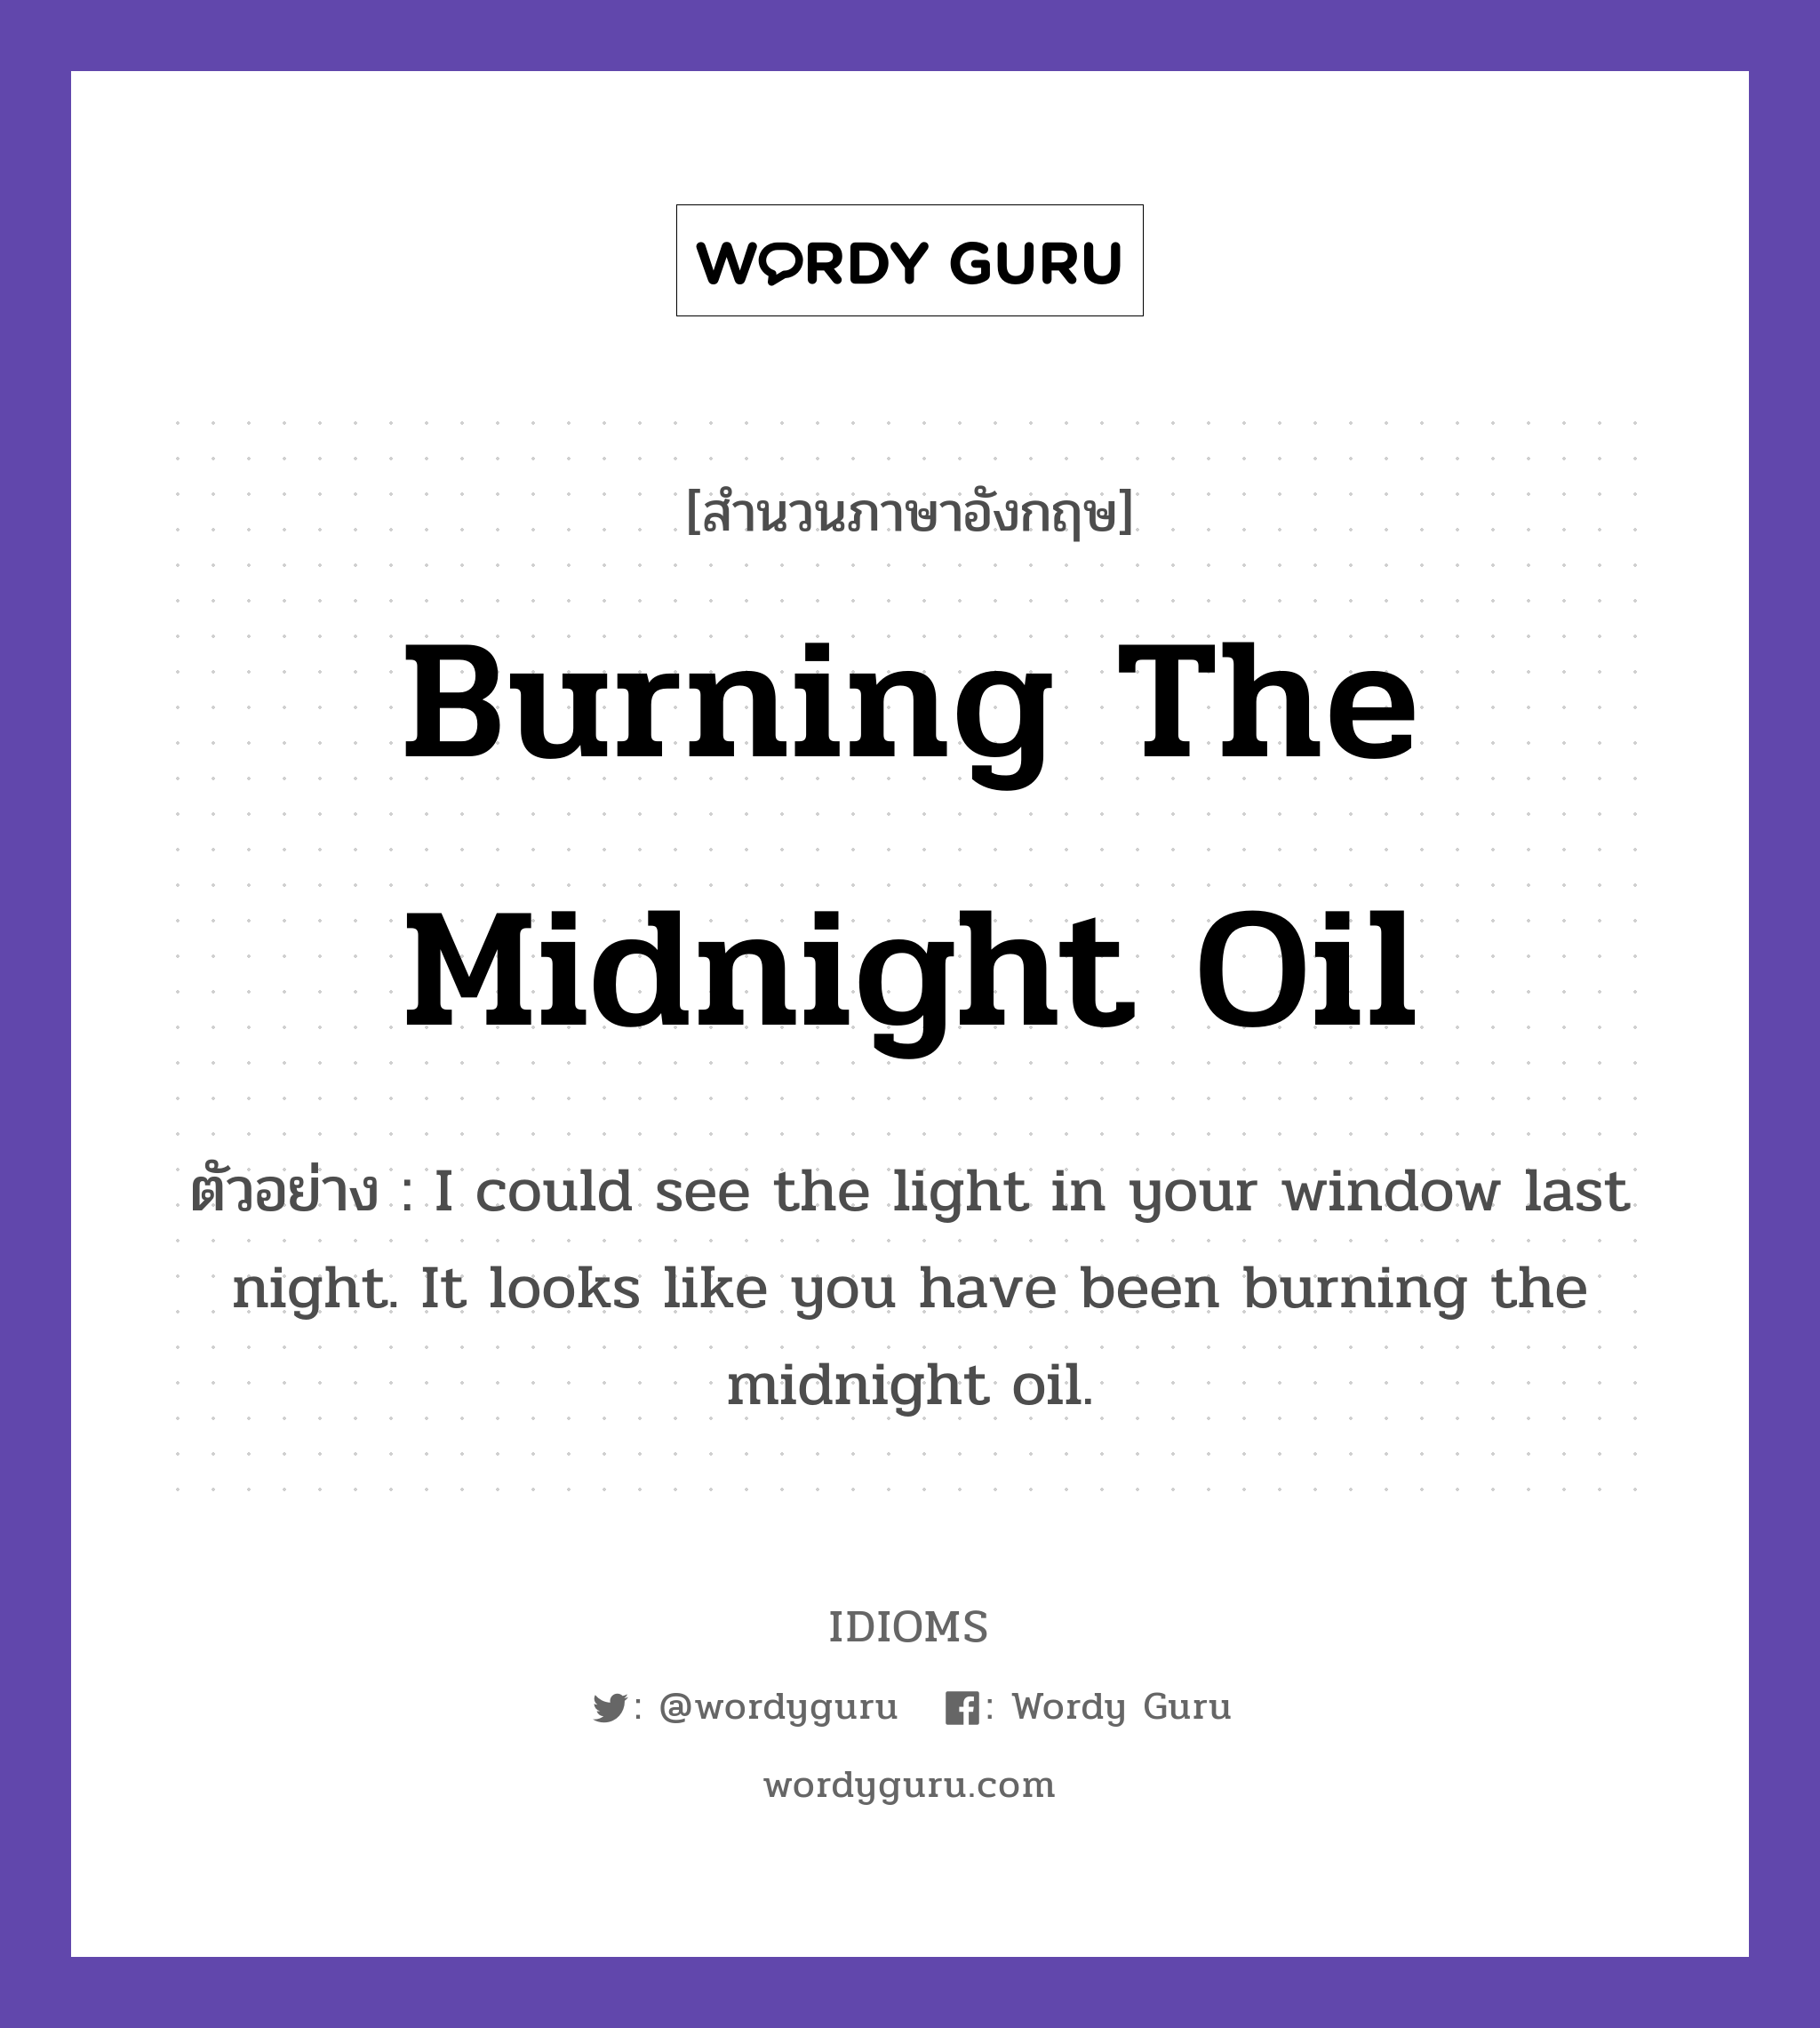 Burning The Midnight Oil แปลว่า?, สำนวนภาษาอังกฤษ Burning The Midnight Oil ตัวอย่าง I could see the light in your window last night. It looks like you have been burning the midnight oil.